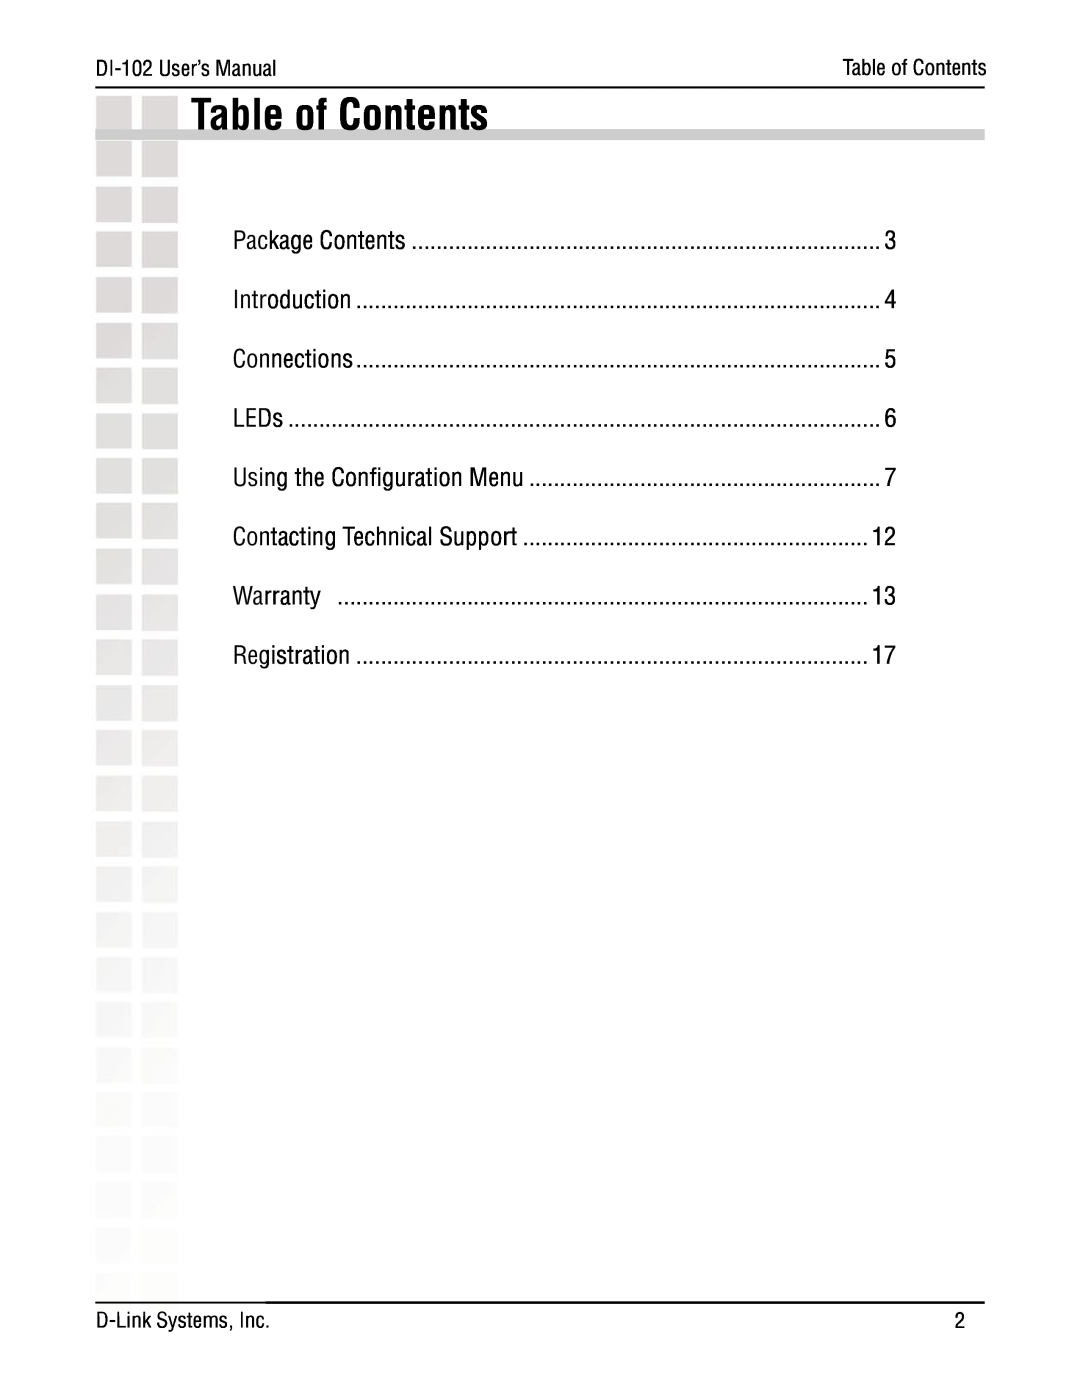 D-Link DI-102, Internet/VoIP Accelerator manual Table of Contents 